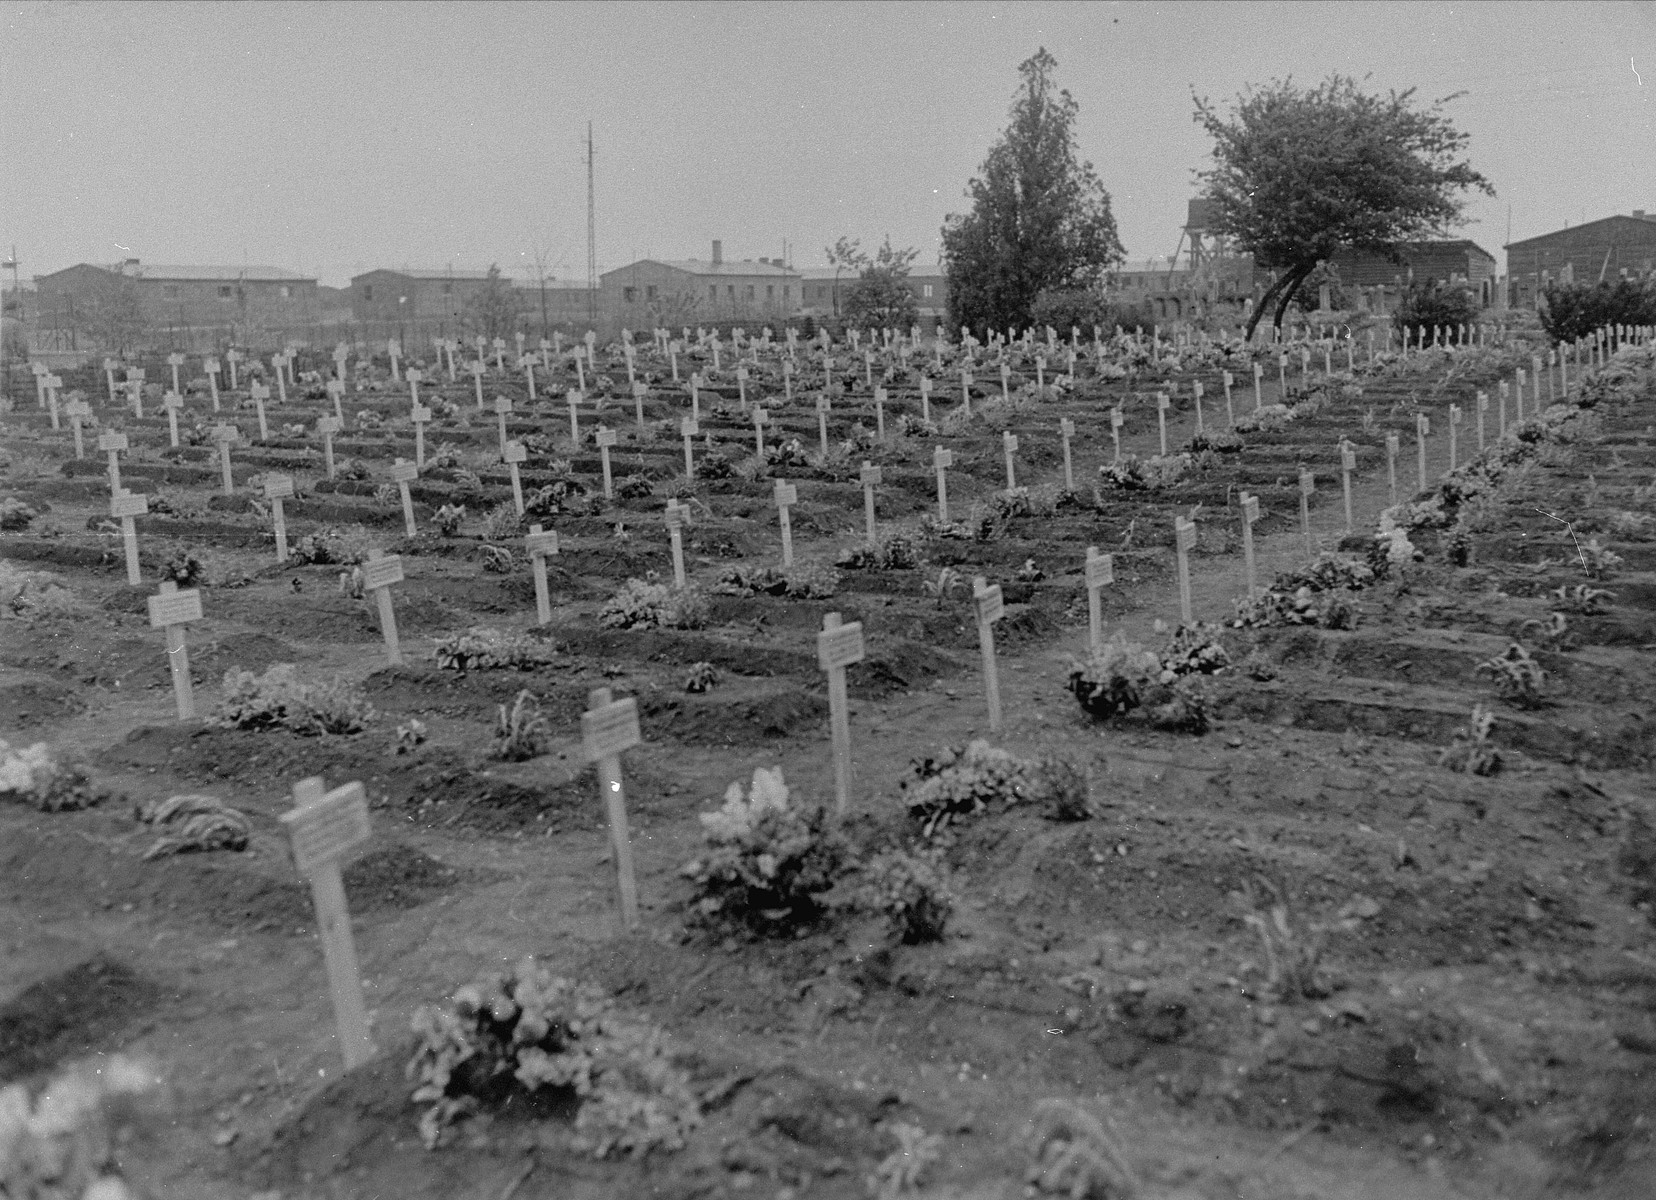 View of a cemetery with wooden grave markers at Ploemnitz ("Leau" after 10 October 1944), a sub-camp of Buchenwald.